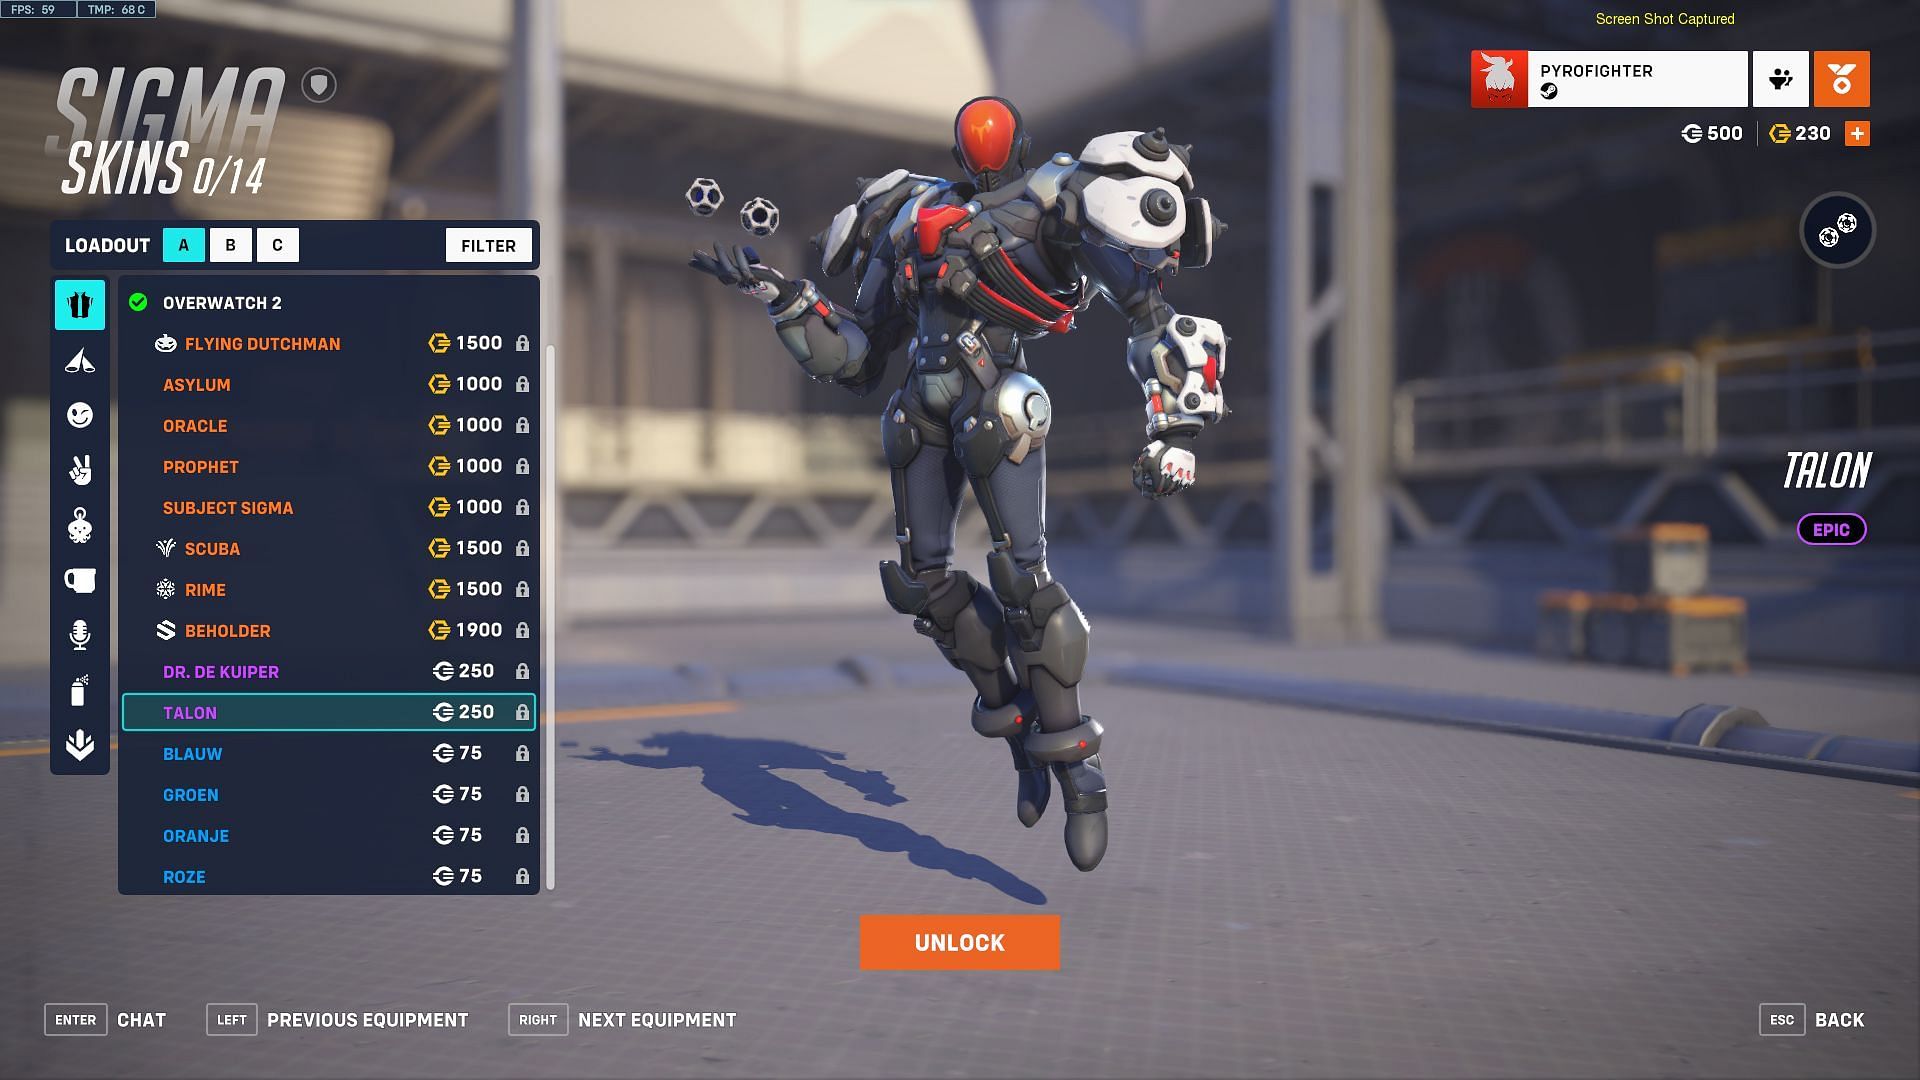 Talon is one of the best Sigma skins in Overwatch 2 (Image via Blizzard Entertainment)